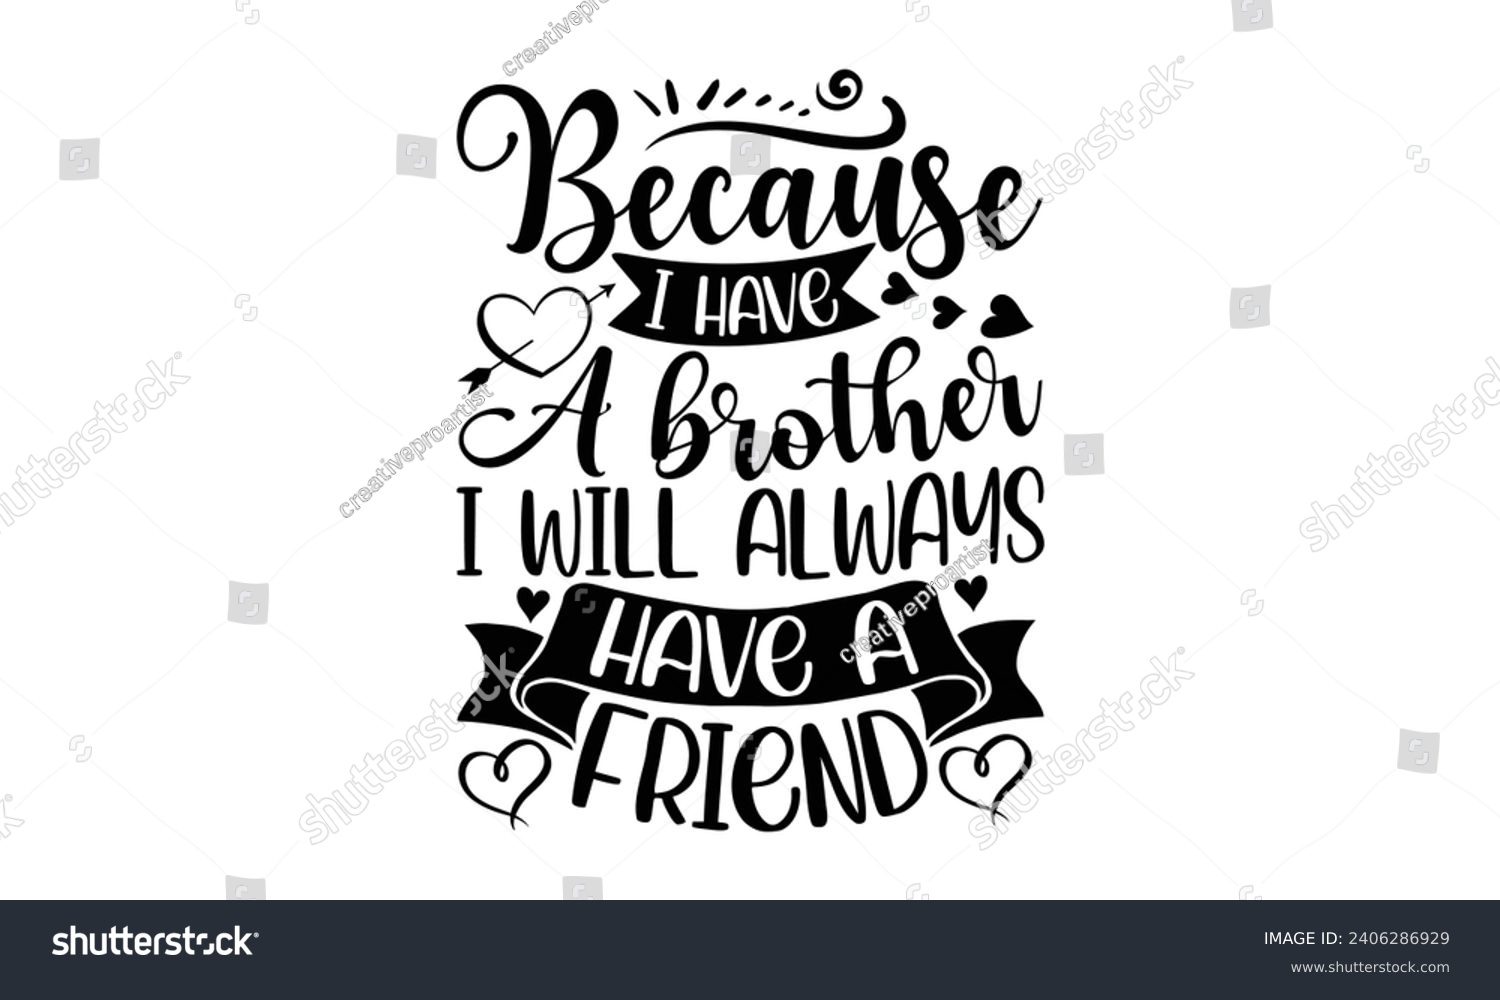 SVG of Because I Have A Brother I Will Always Have A Friend- Best friends t- shirt design, Hand drawn vintage illustration with hand-lettering and decoration elements, greeting card template with typography  svg